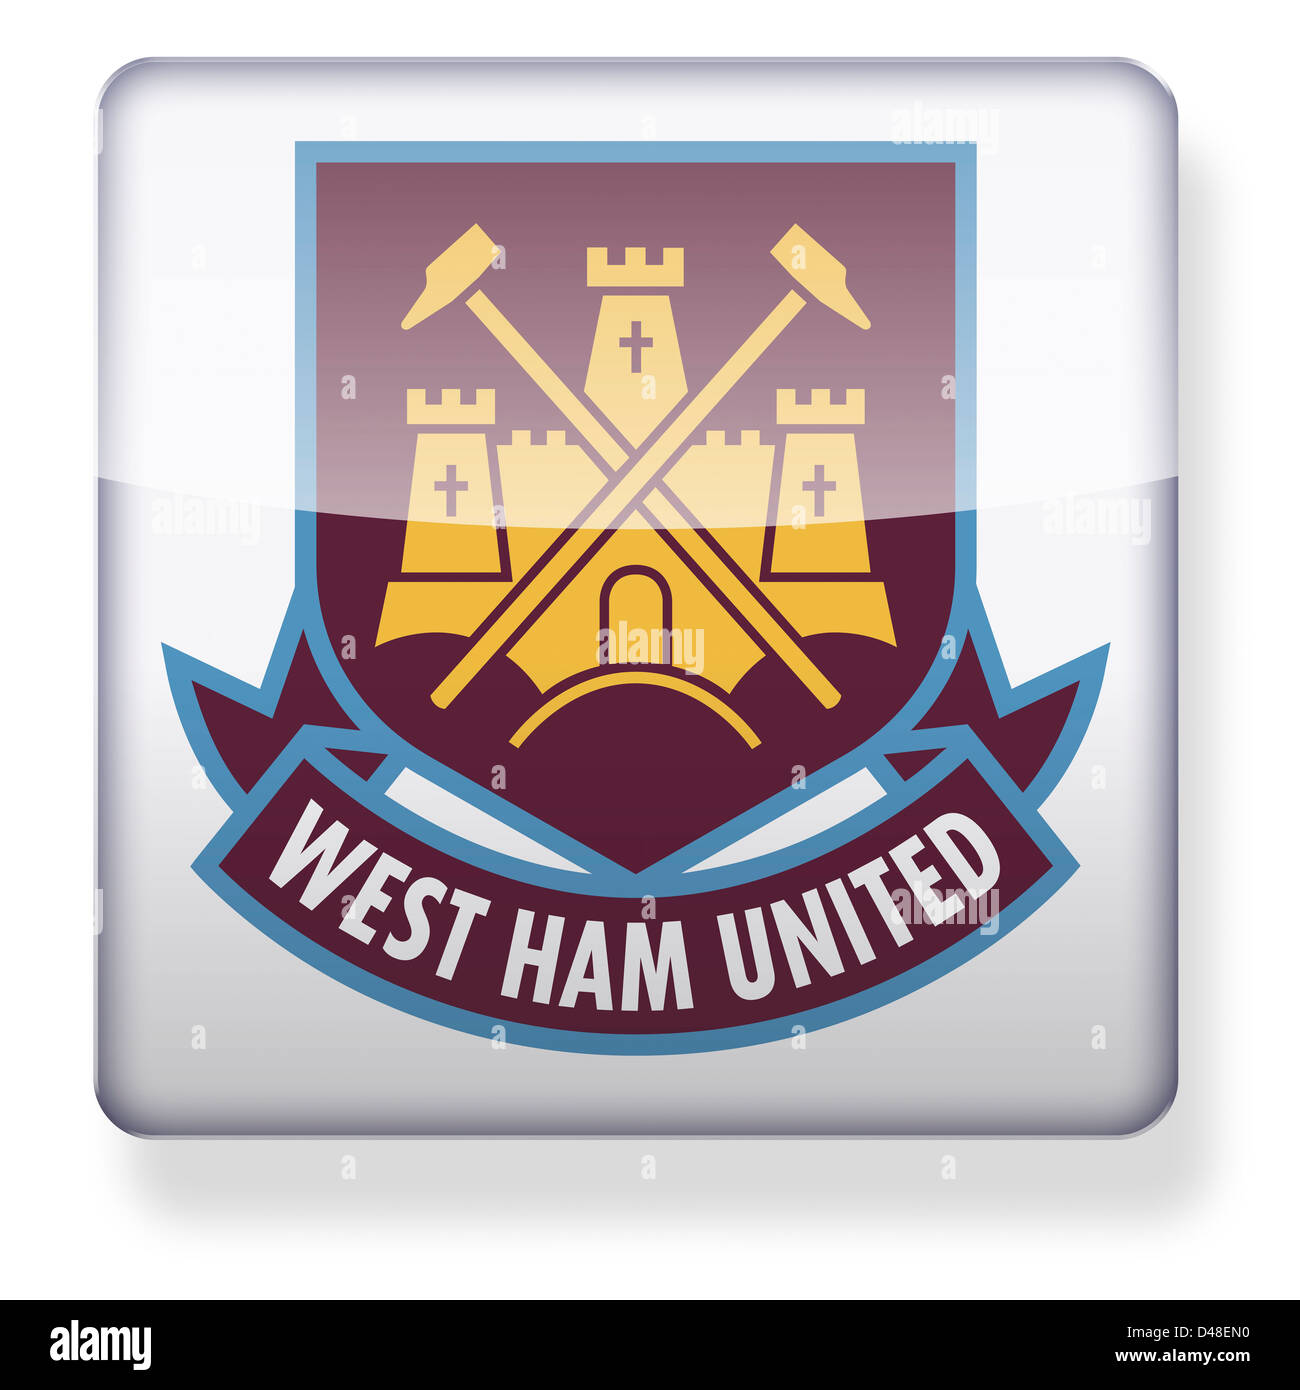 West ham United football club logo as an app icon. Clipping path included. Stock Photo